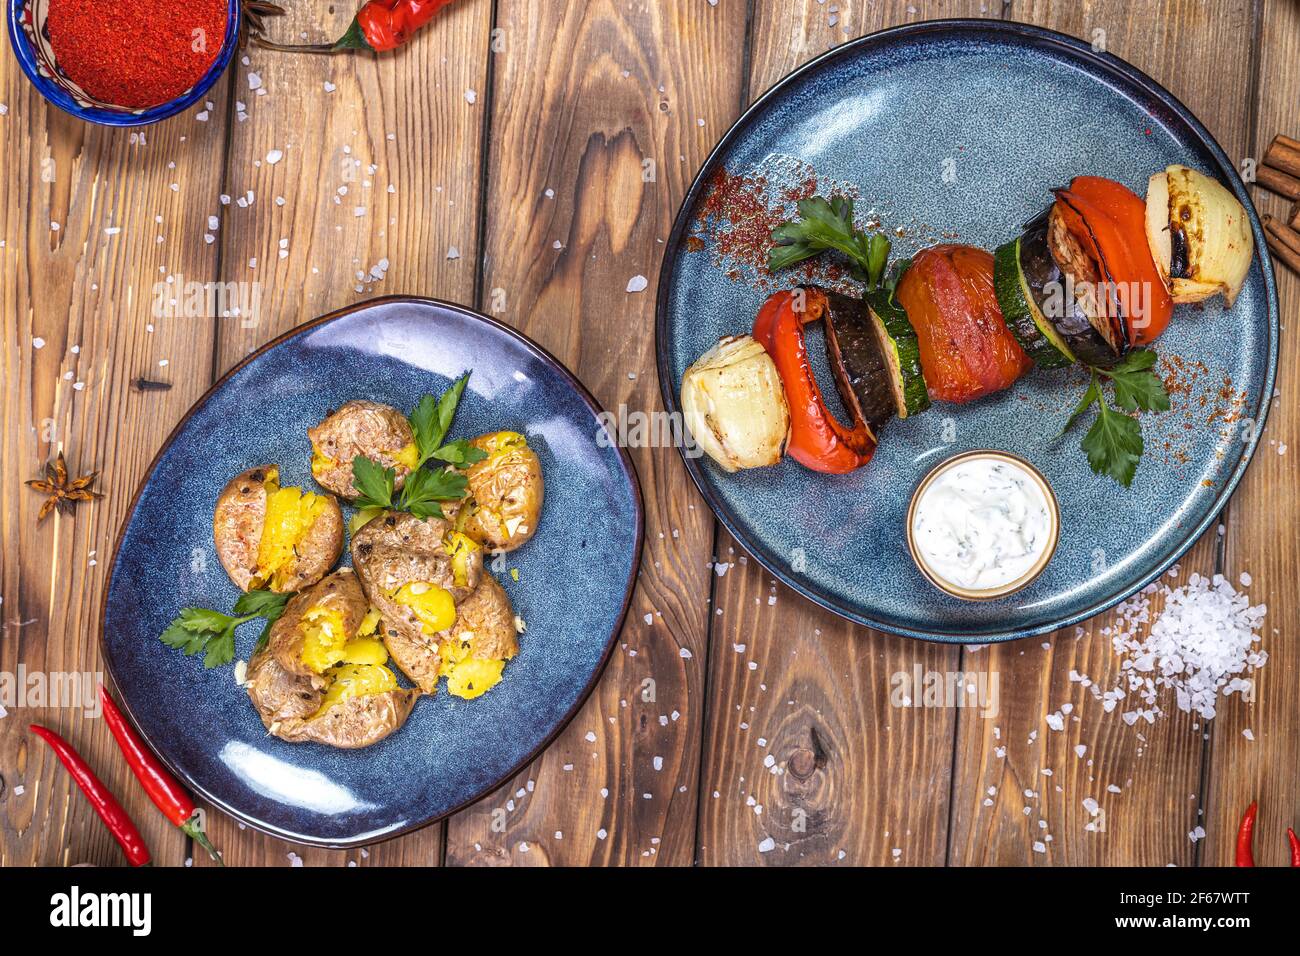 Boiled potatoes, coarse salt, grilled vegetables on a brown wooden background. Copy the space. Stock Photo